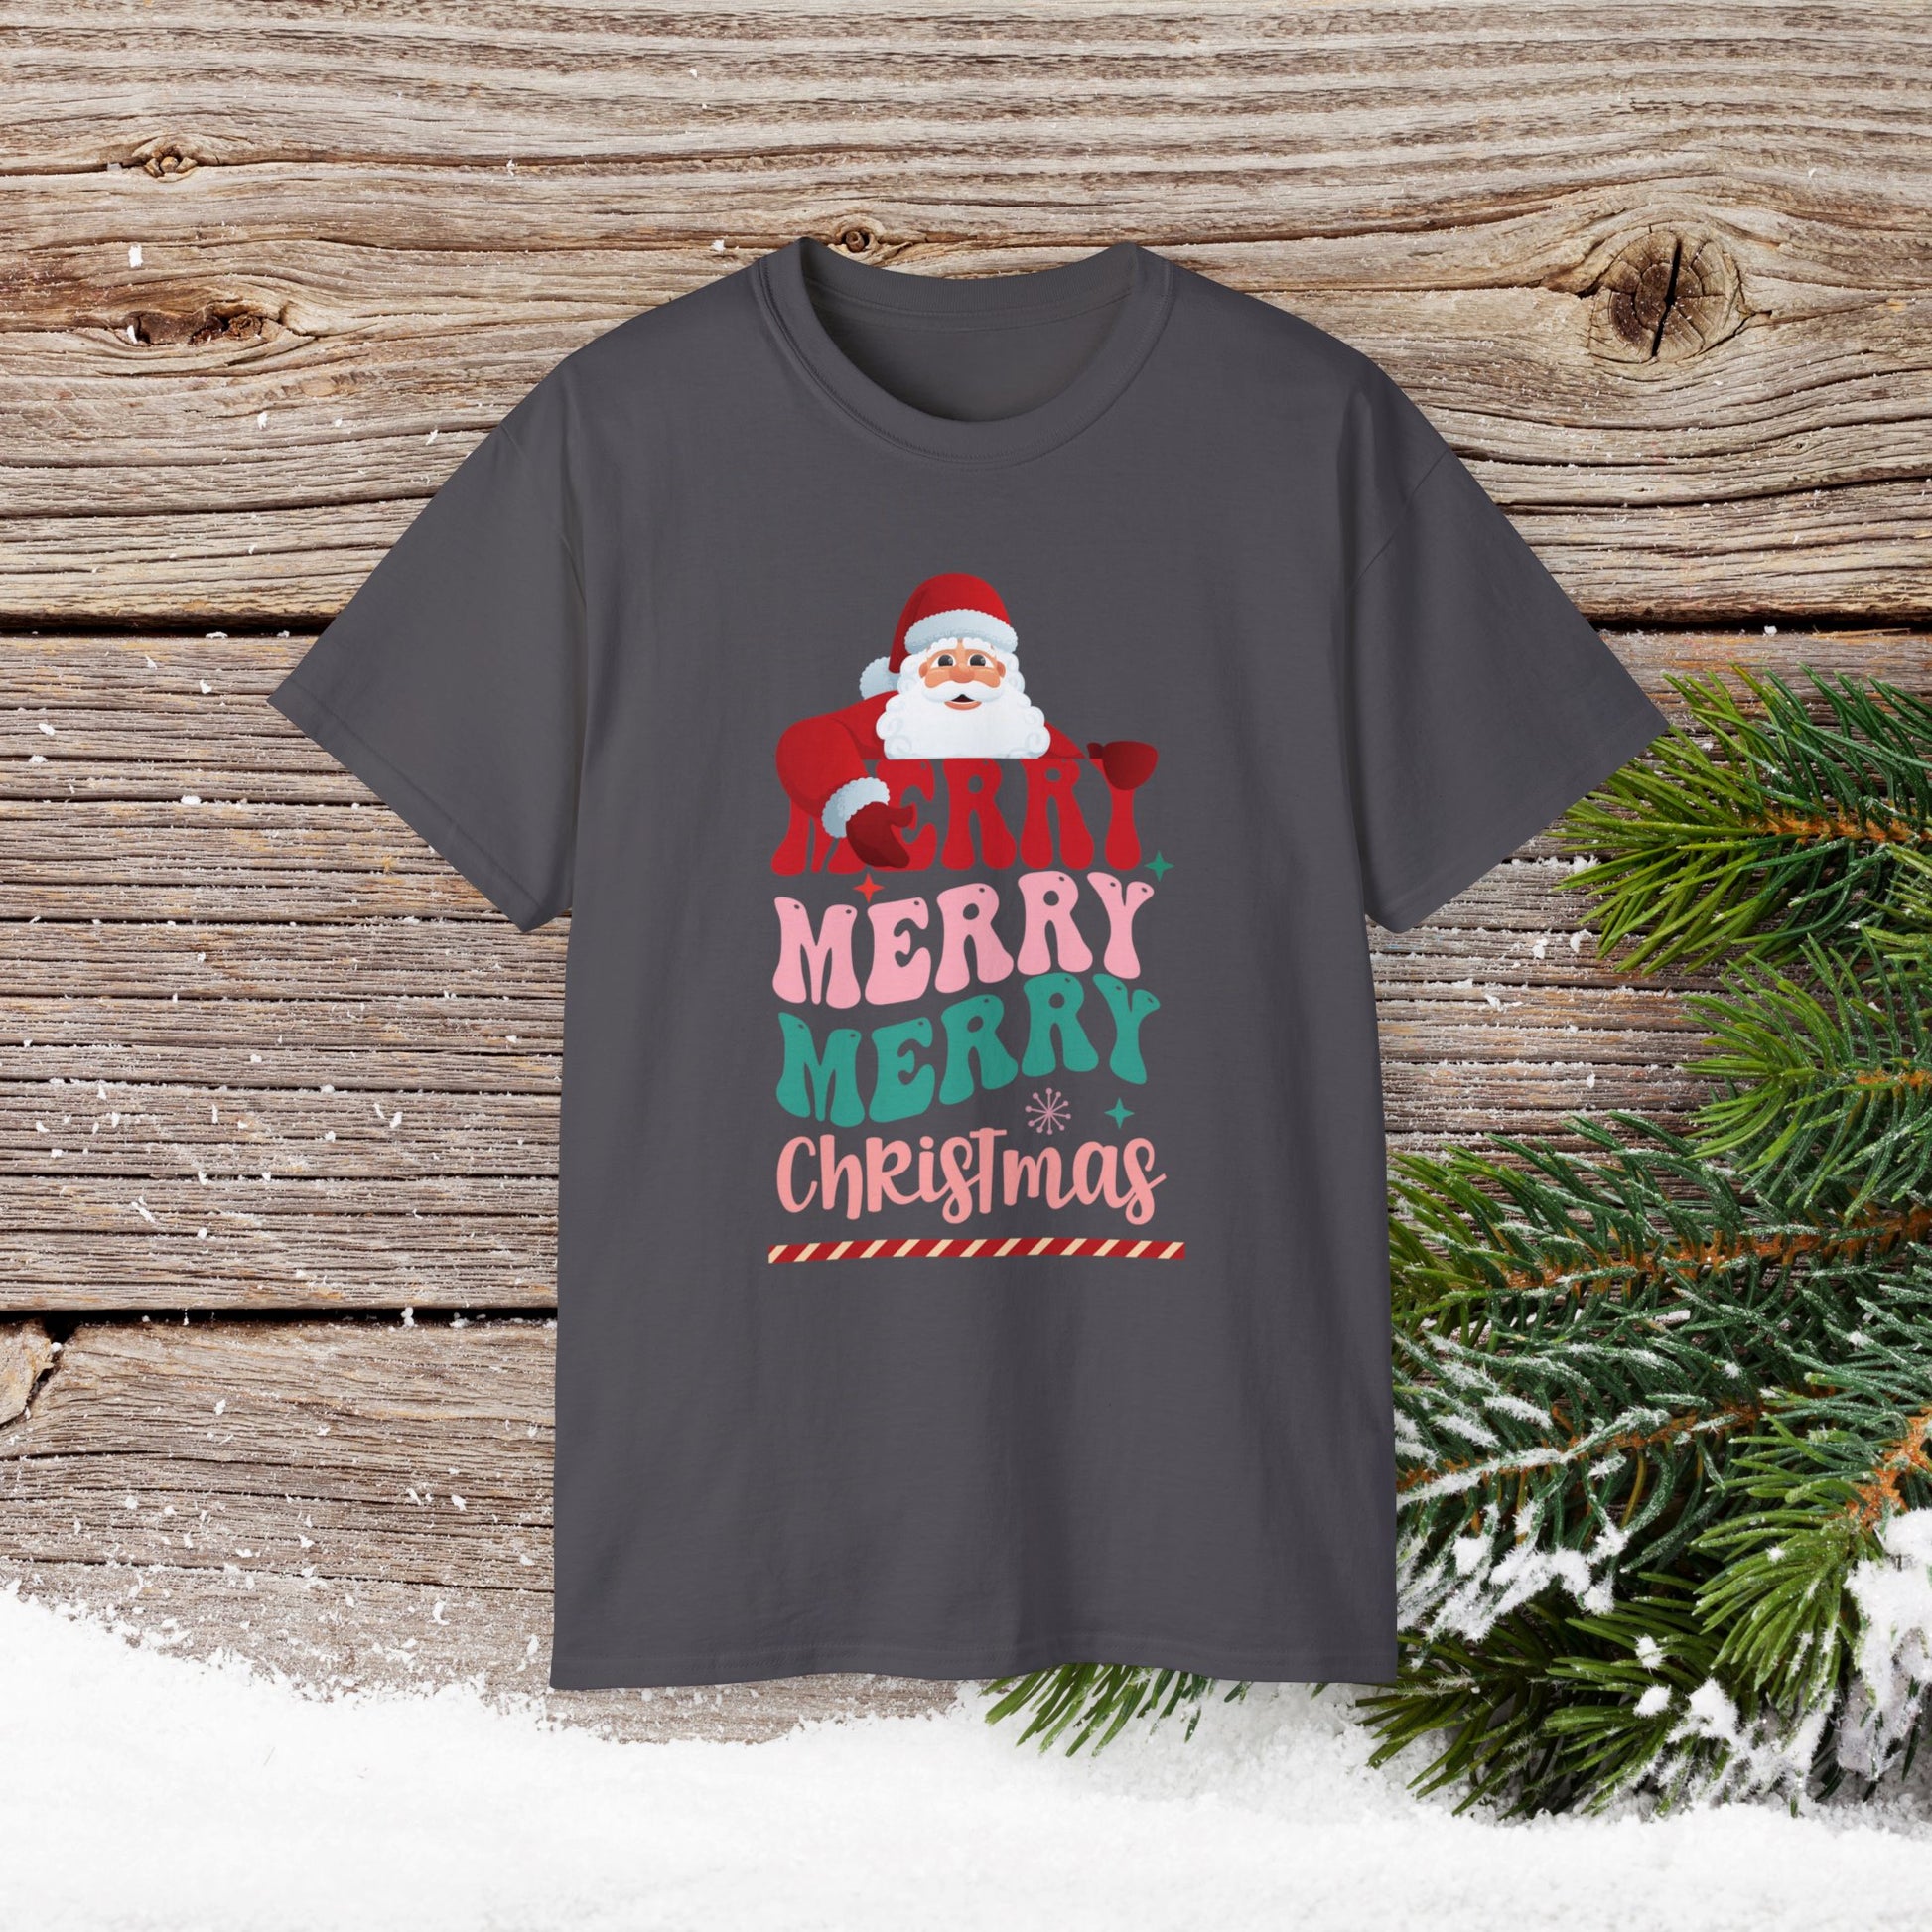 Christmas T-Shirt - Merry Merry Merry Christmas - Cute Christmas Shirts - Youth and Adult Christmas TShirts T-Shirts Graphic Avenue Charcoal Adult Small 